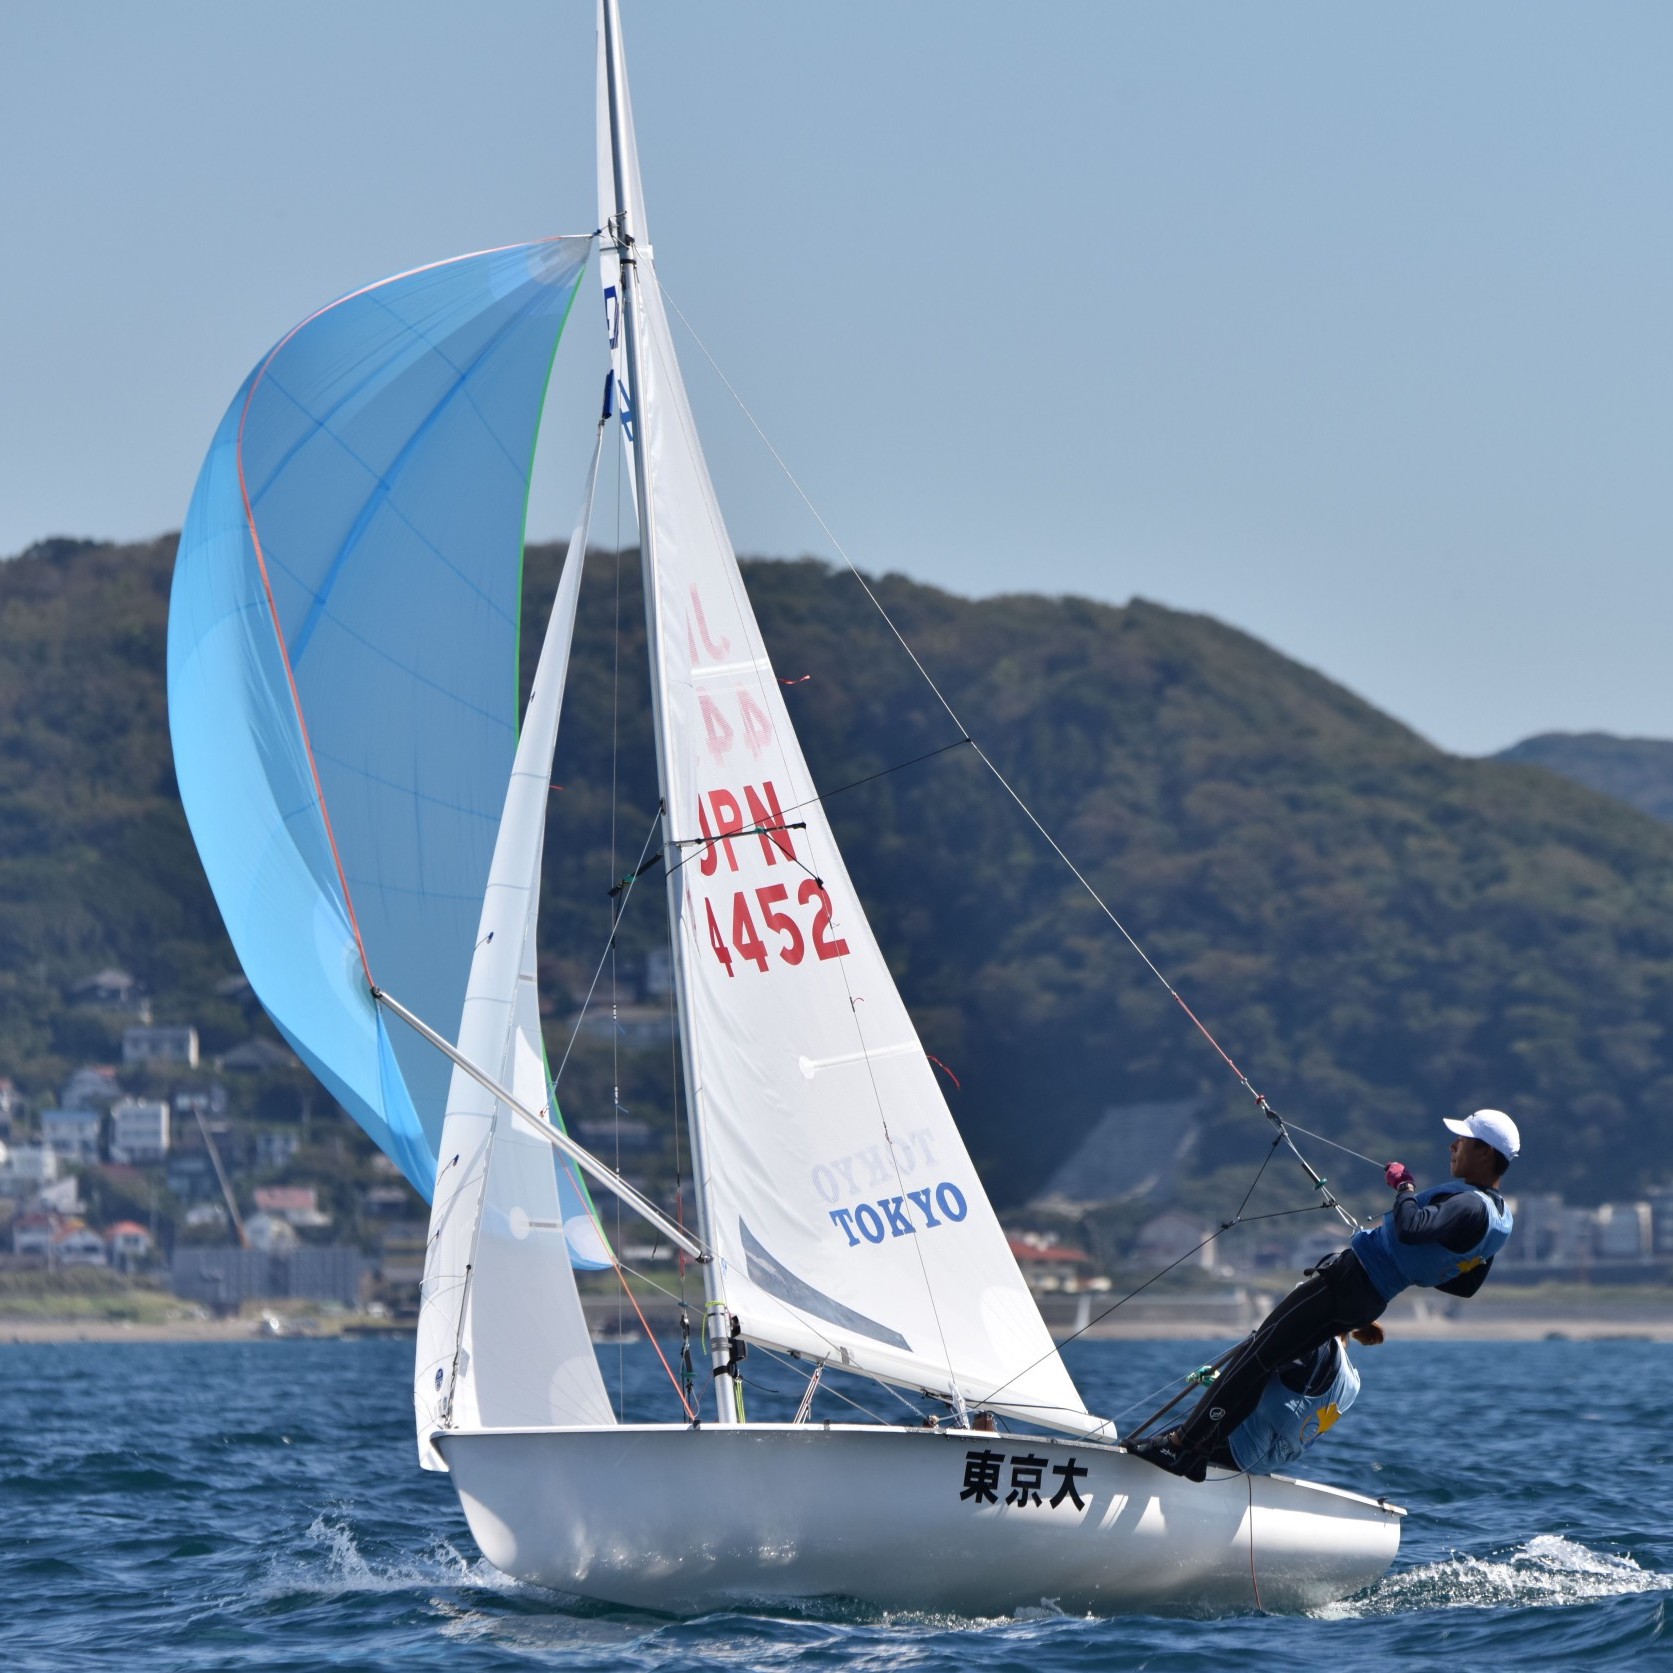 The University of Tokyo Sailing Team/About Us